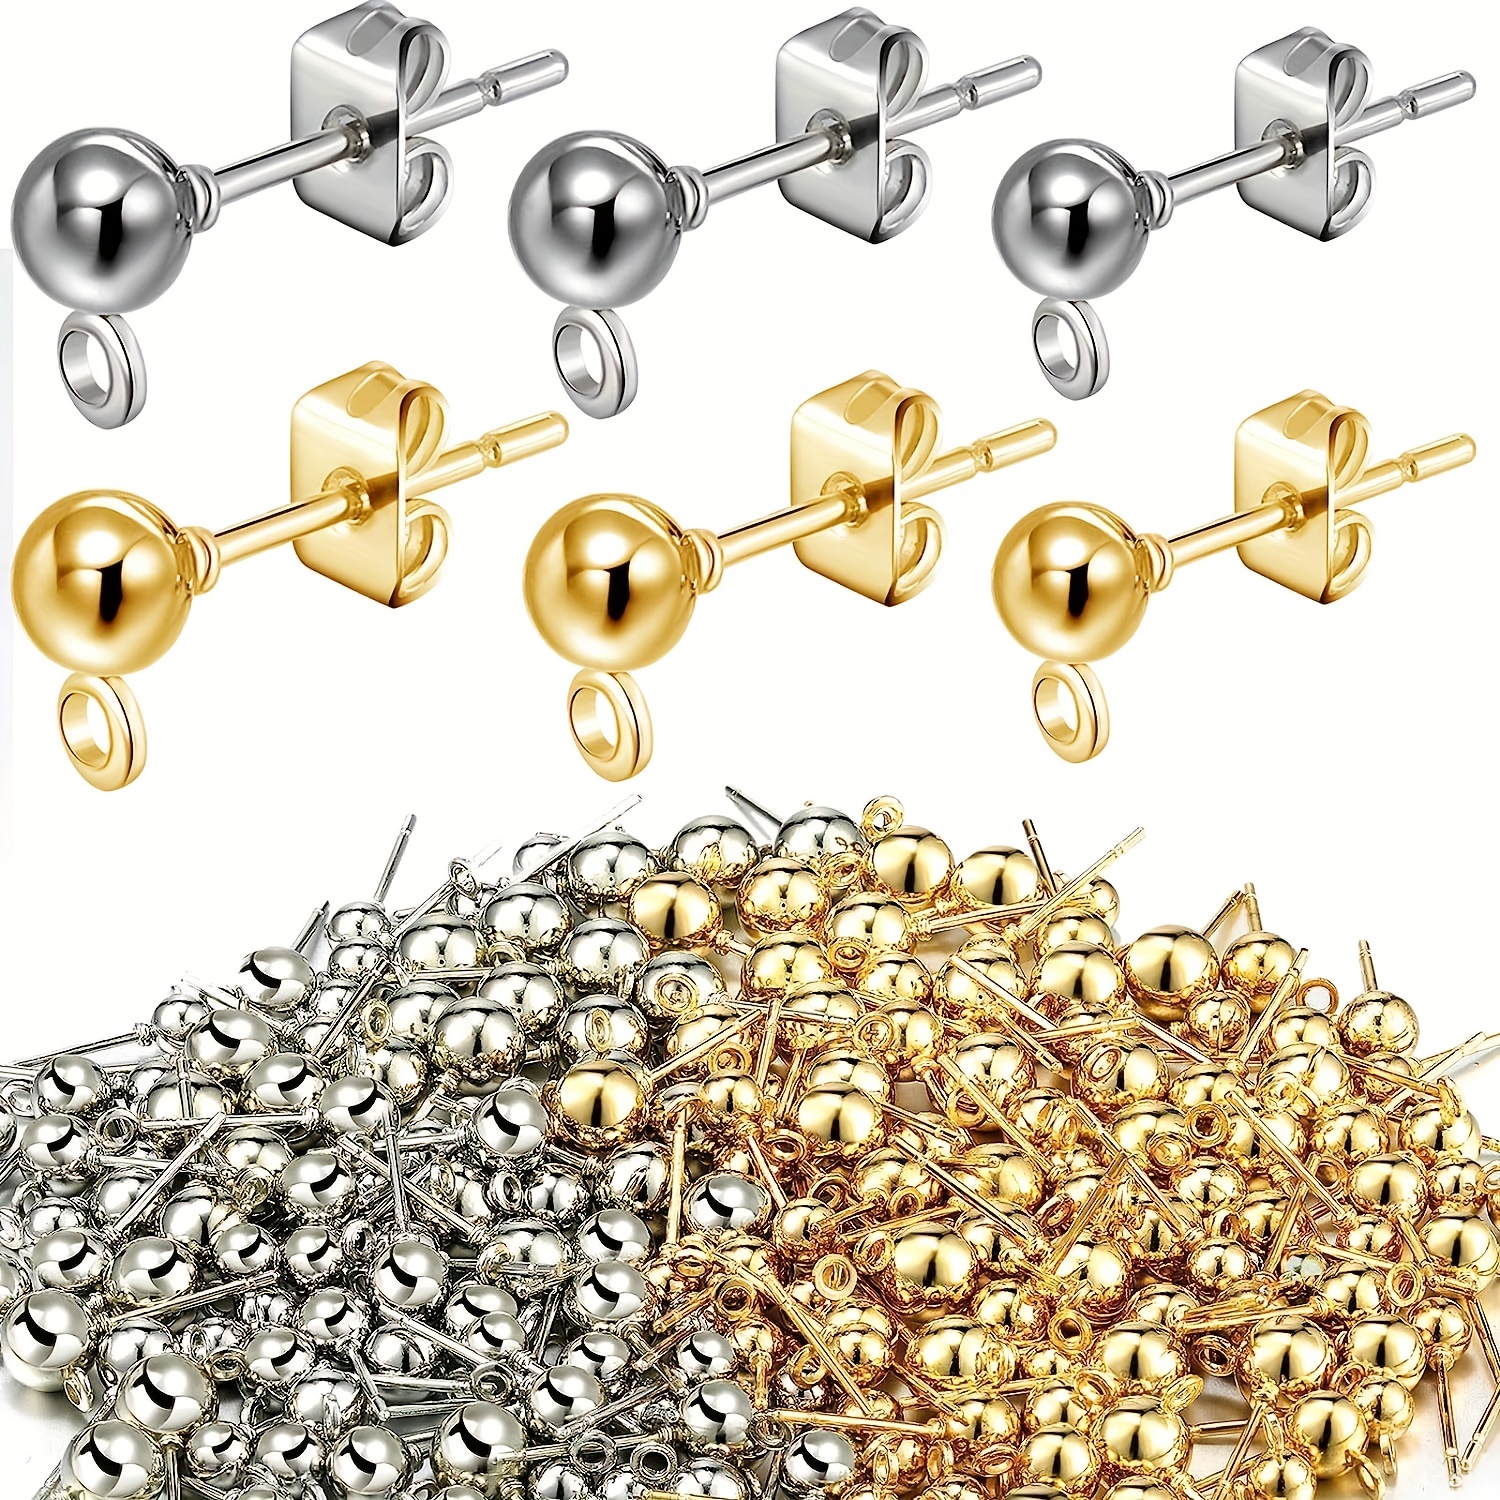 

20pcs Ball Post Earring Stud Set For Diy Earrings Making With 20 Pieces Butterfly Earrings Pin Back Earrings With Loop For Diy Jewelry Making Findings Earrings Back Replacement, 4 Mm (silvery, Golden)